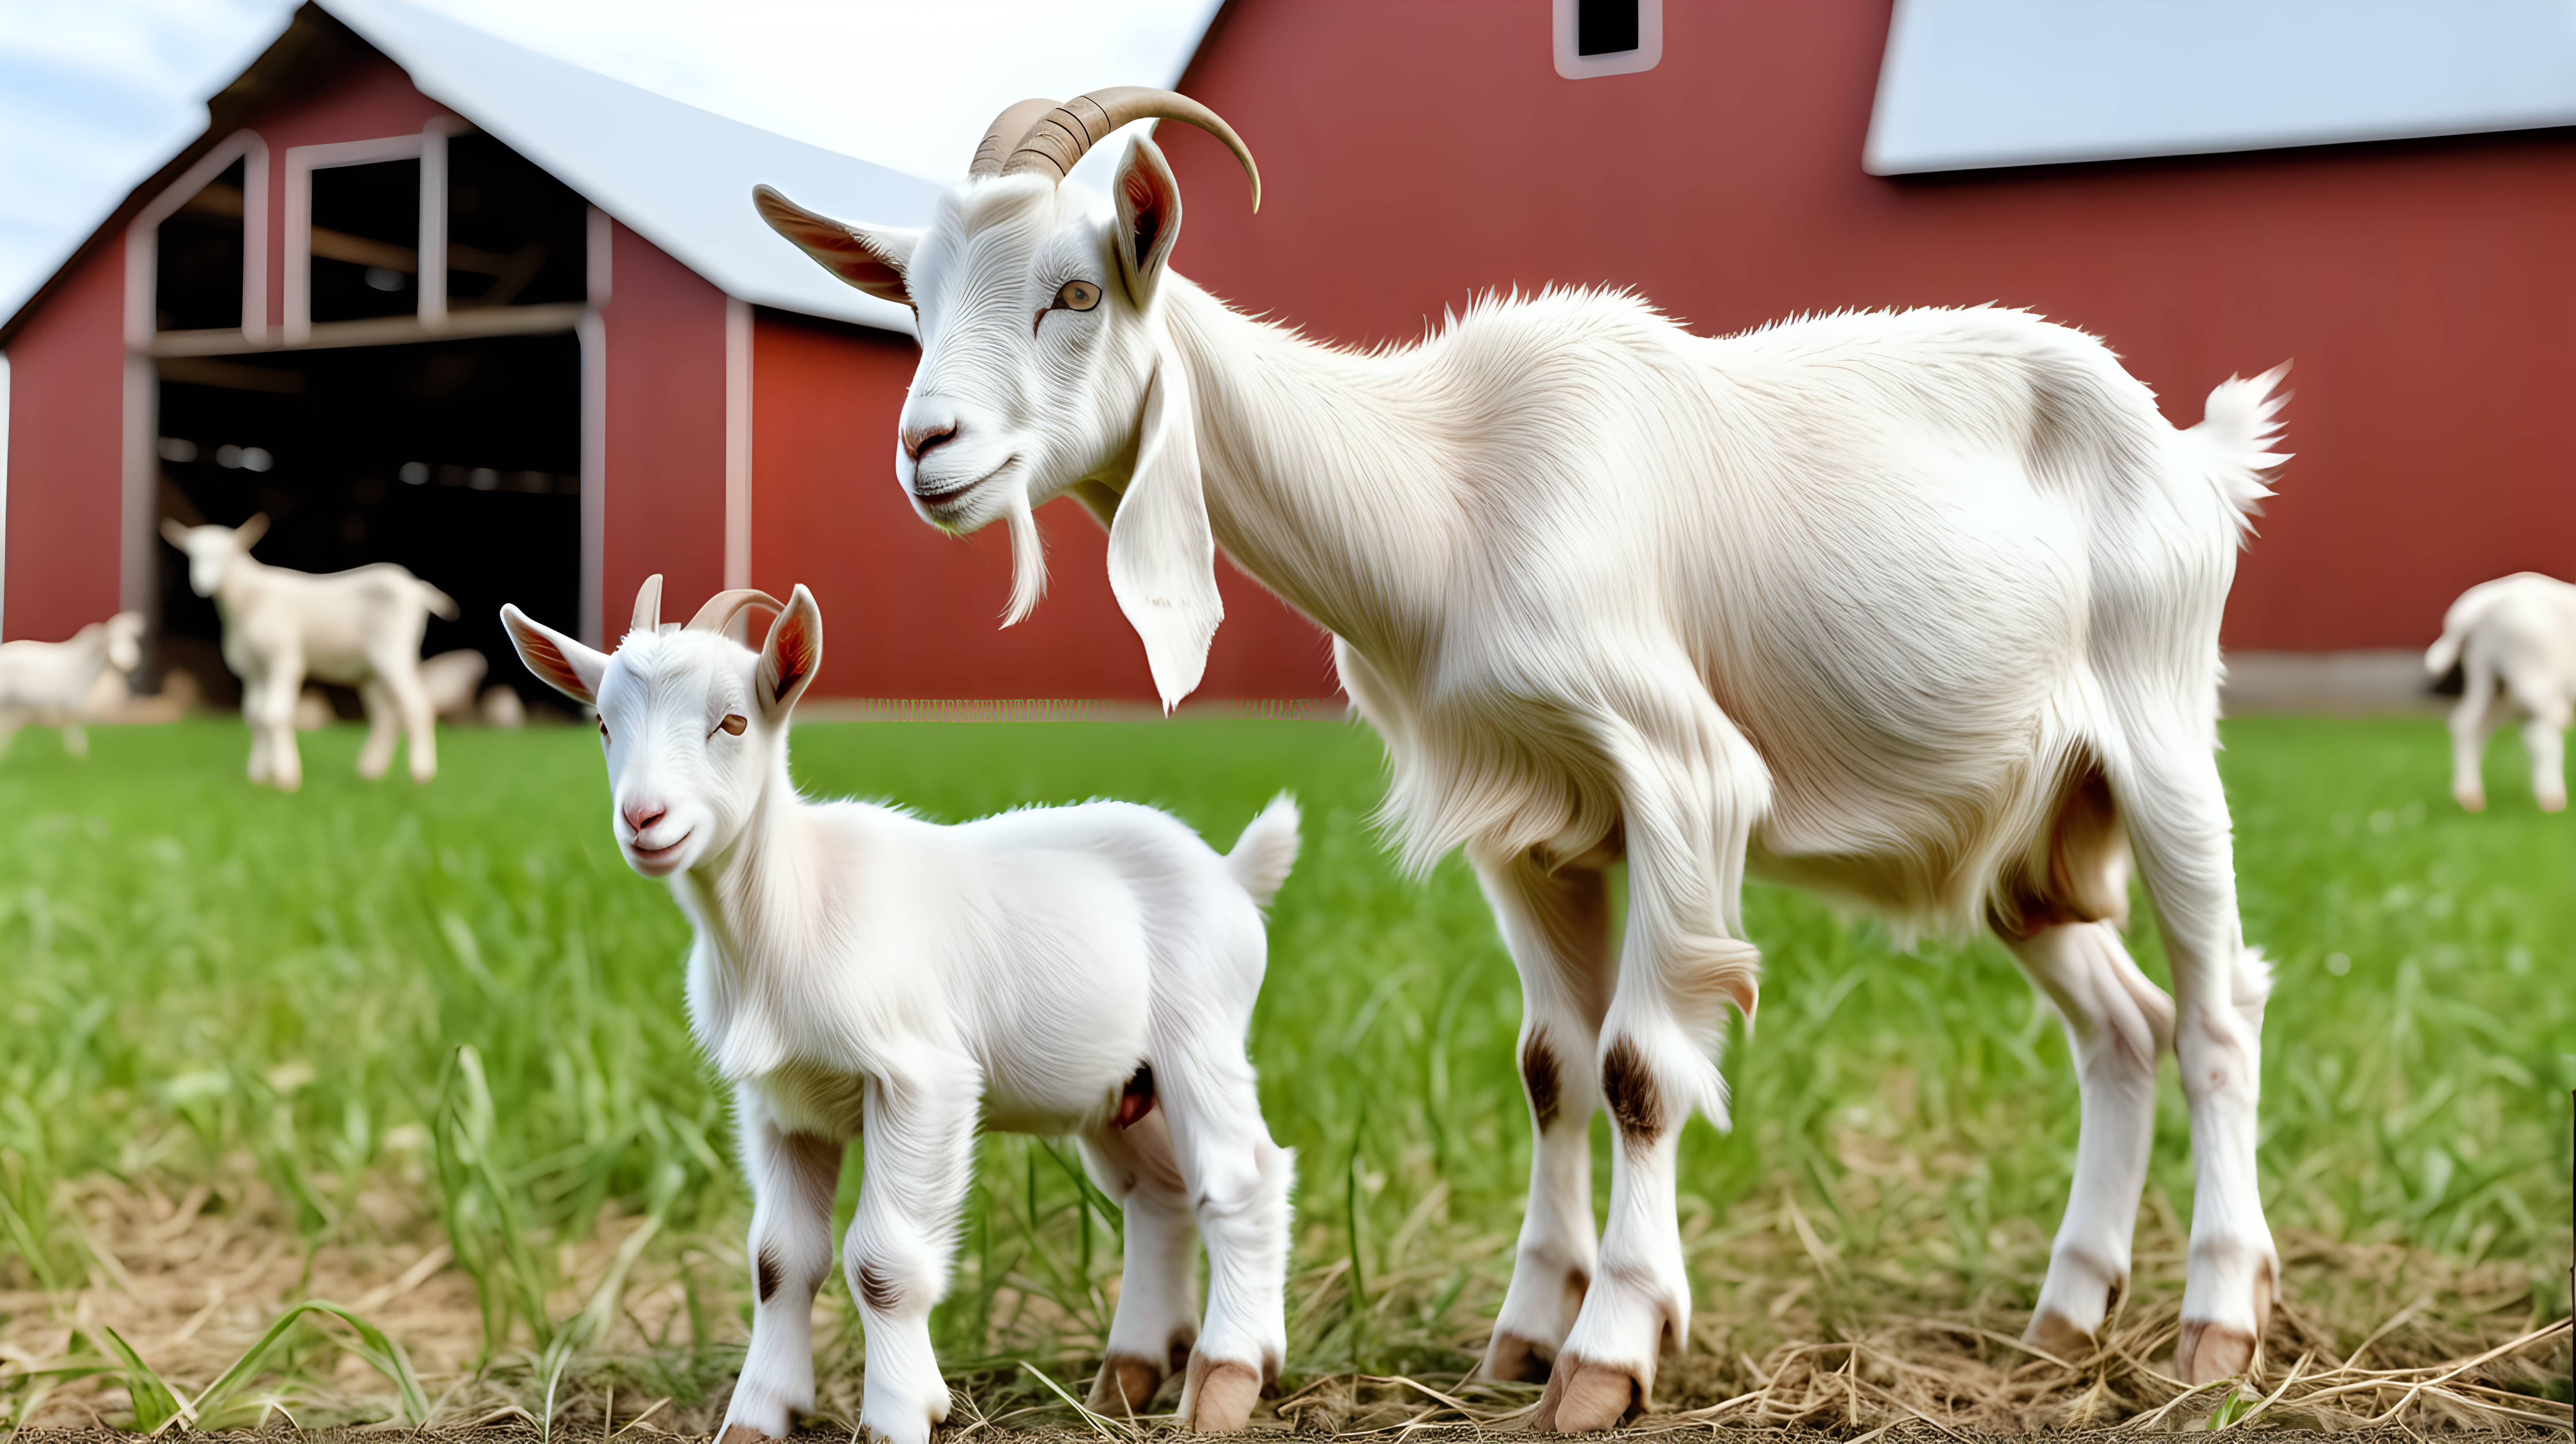 Goat kid with Goat in field, farm barn background, isolated on background